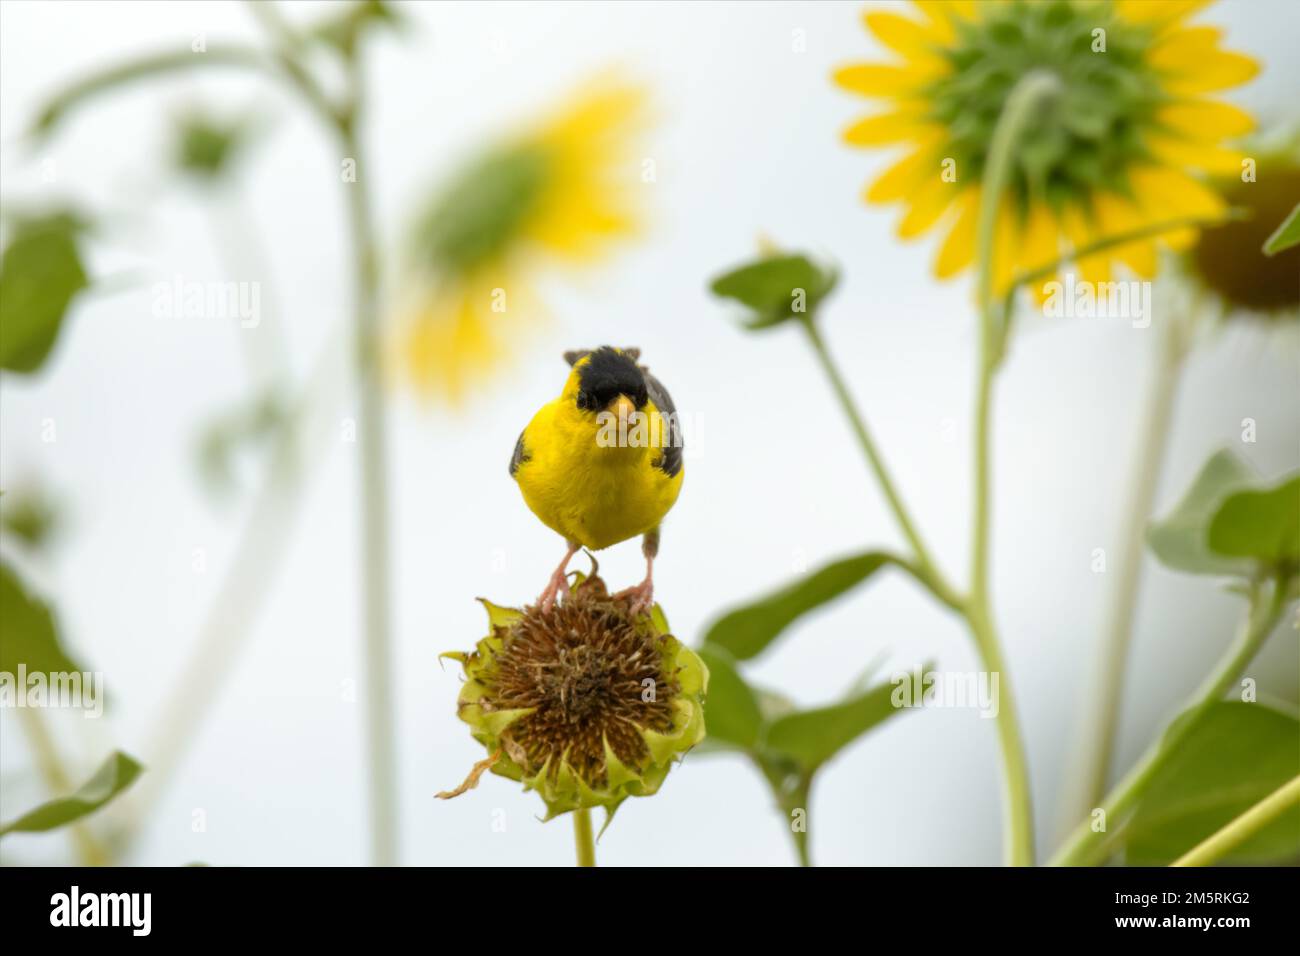 Male American Goldfinch on a wild sunflower, eating seeds from it; with blooming sunflowers on the background Stock Photo